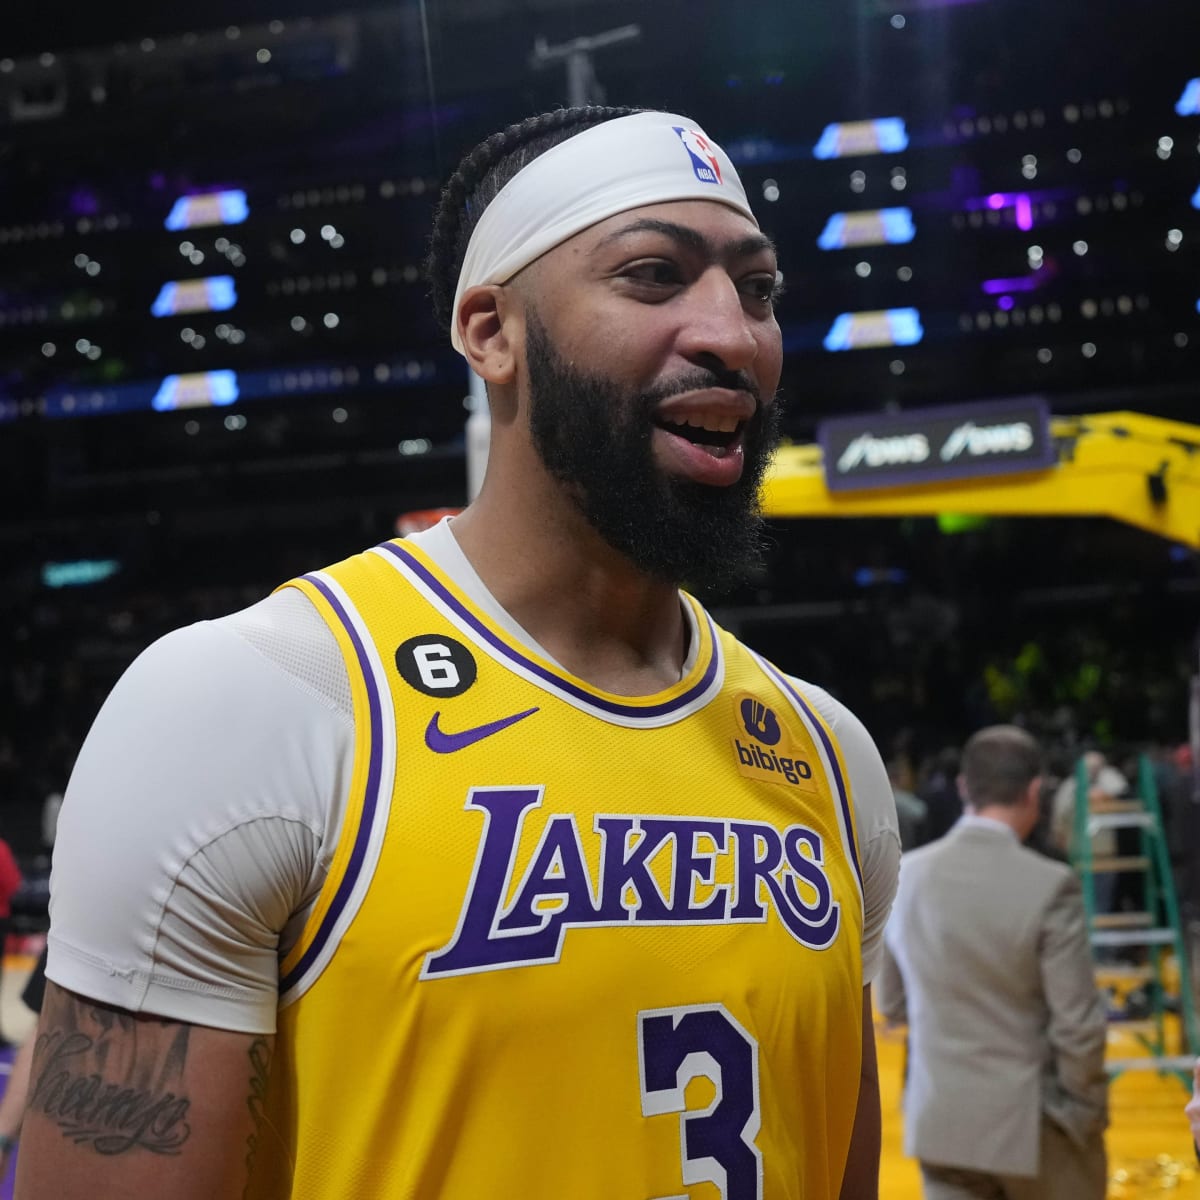 Lakers News: Anthony Davis Hopes to Have His Jersey Retired in Los